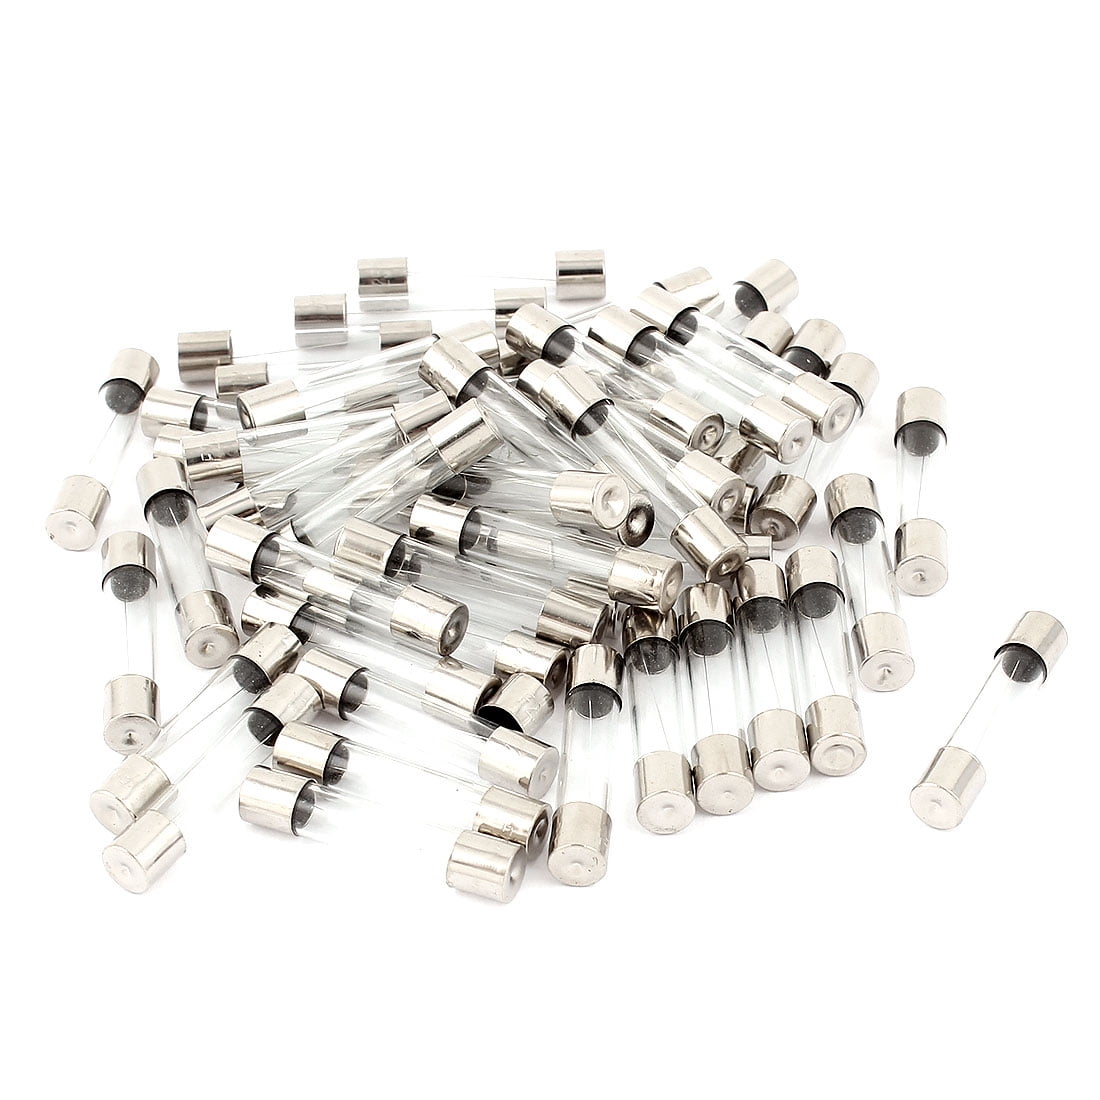 40 pieces quick blown glass tube fuses 5x20mm 2A 250V